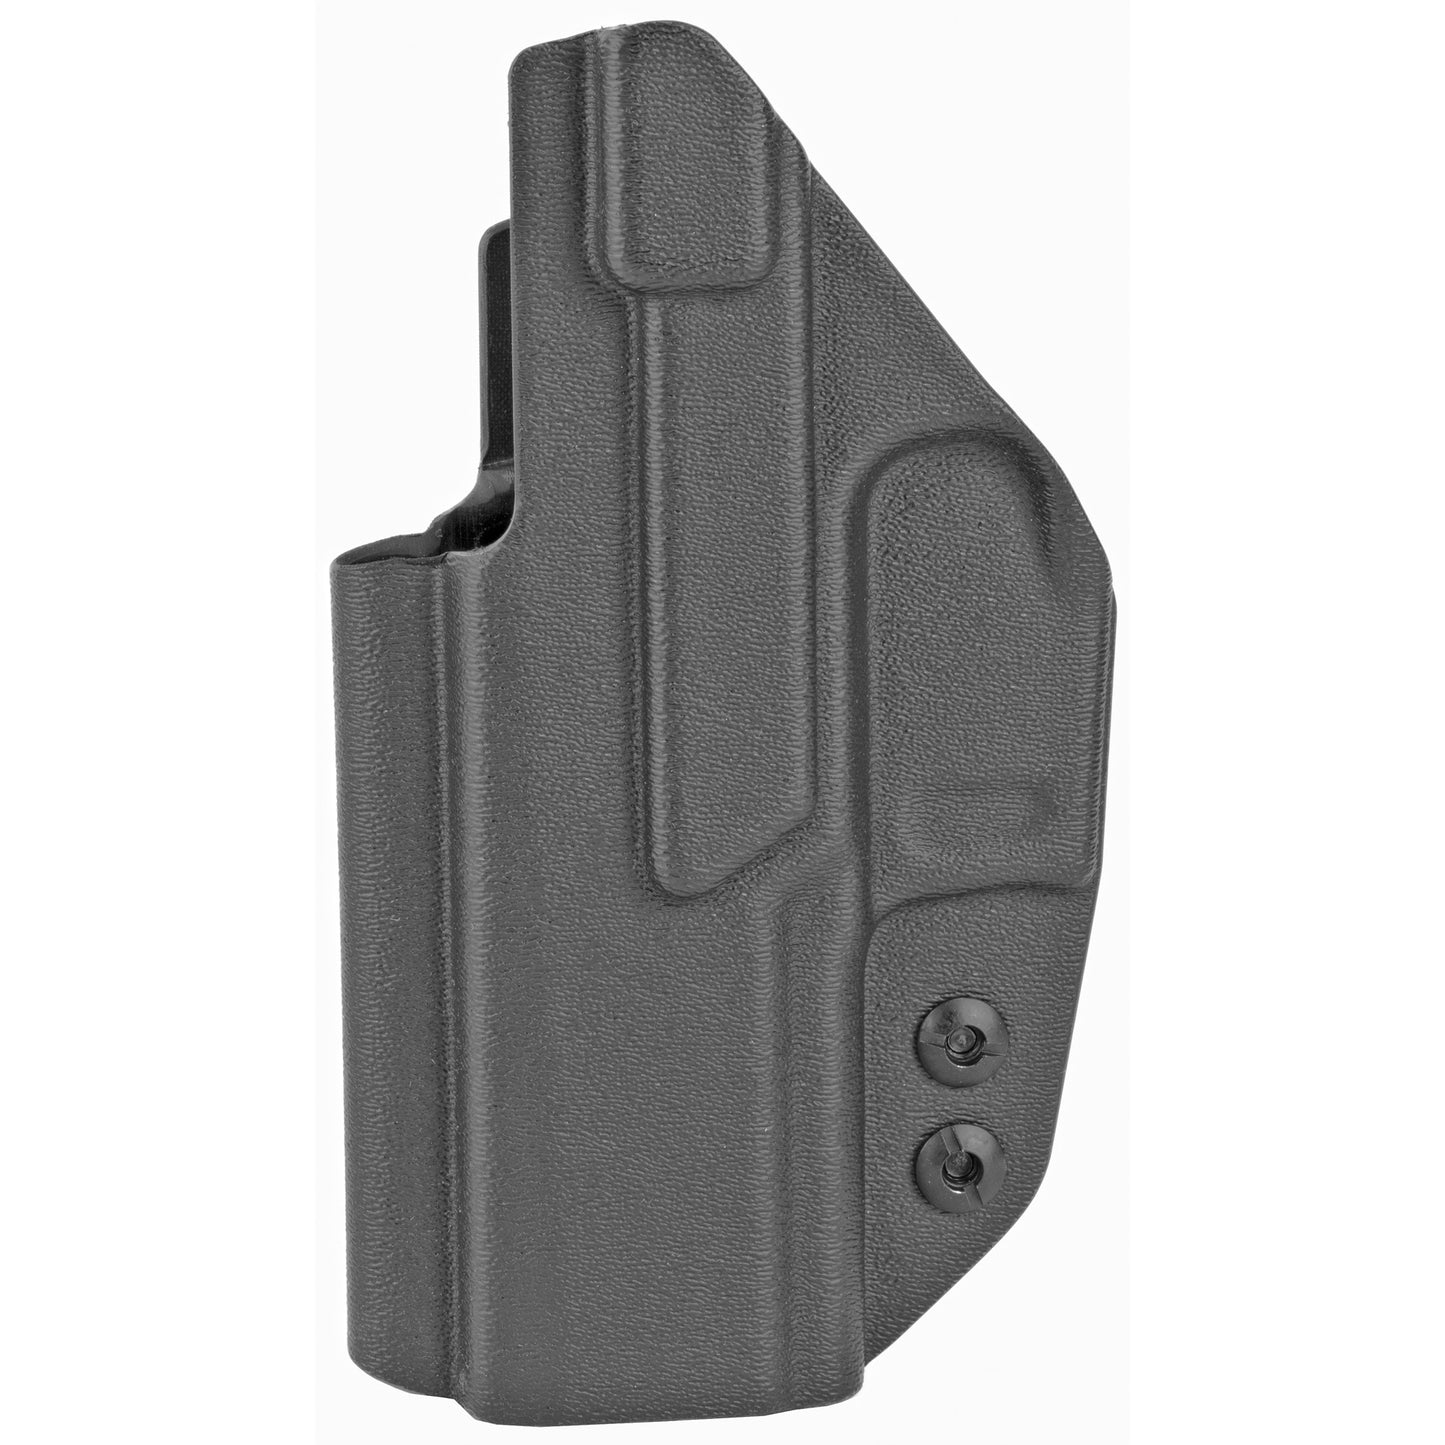 1791 Tactical Kydex Inside Waistband Holster Right Hand Black Fit Sig P320 Kydex